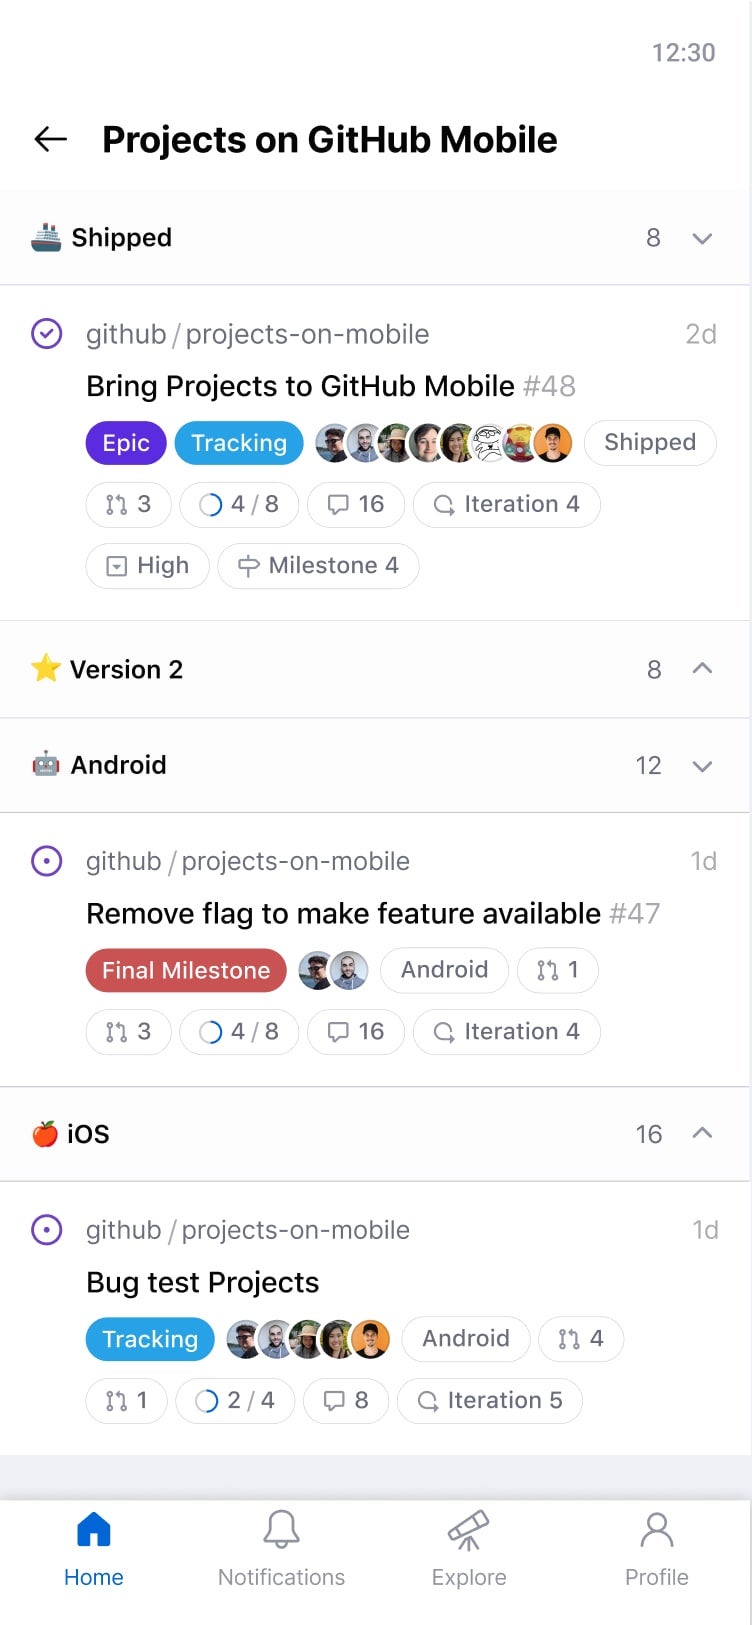 GitHub Mobile Projects